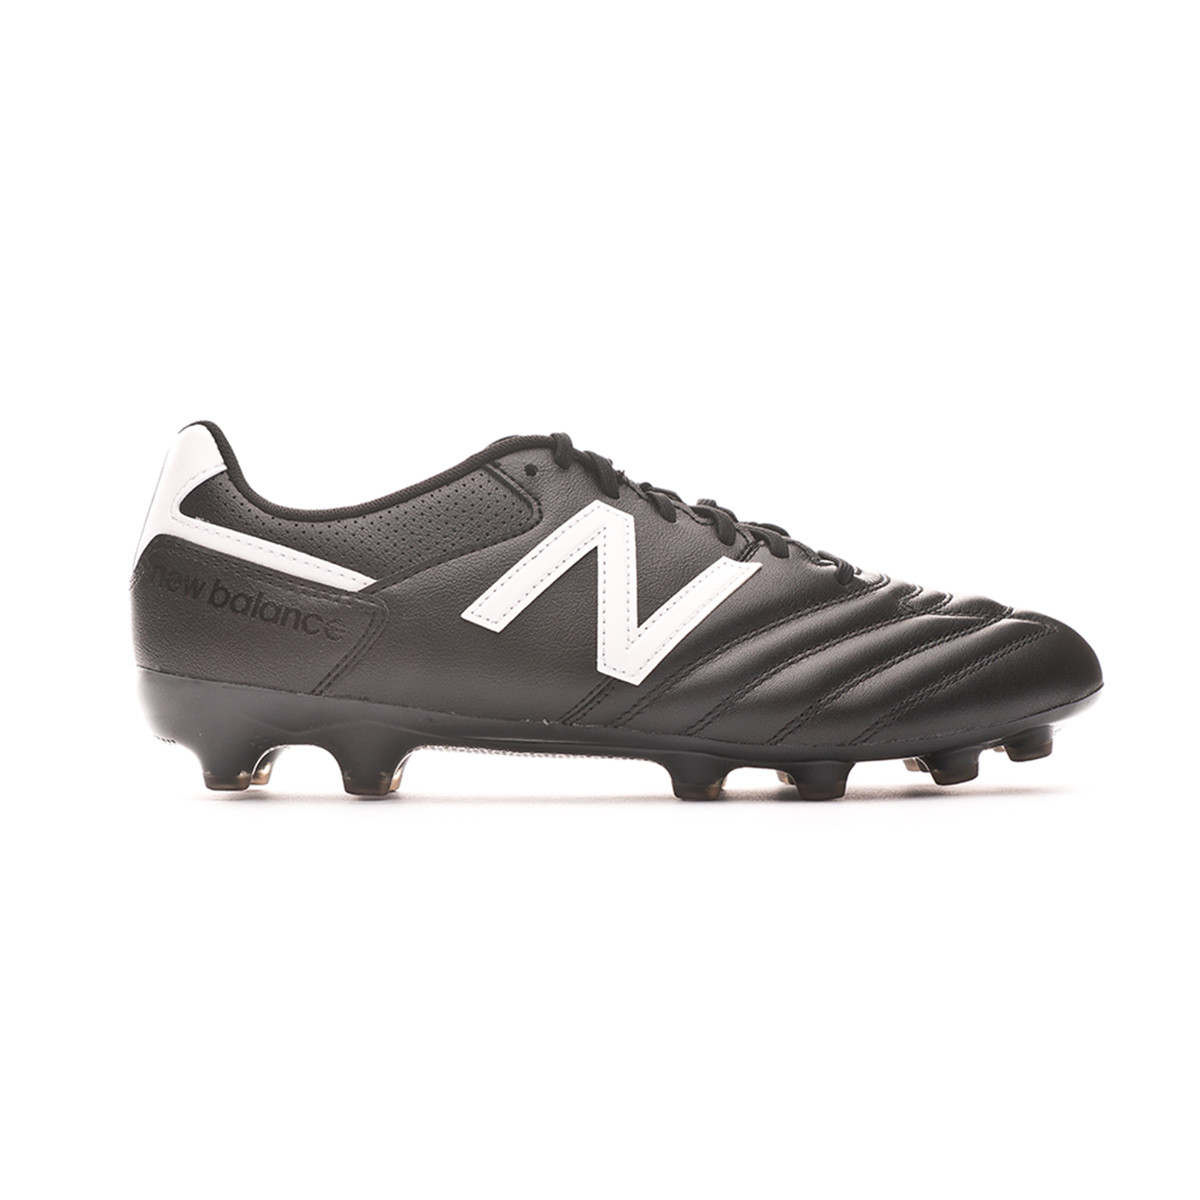 New Balance Black And White Football Boots | vlr.eng.br